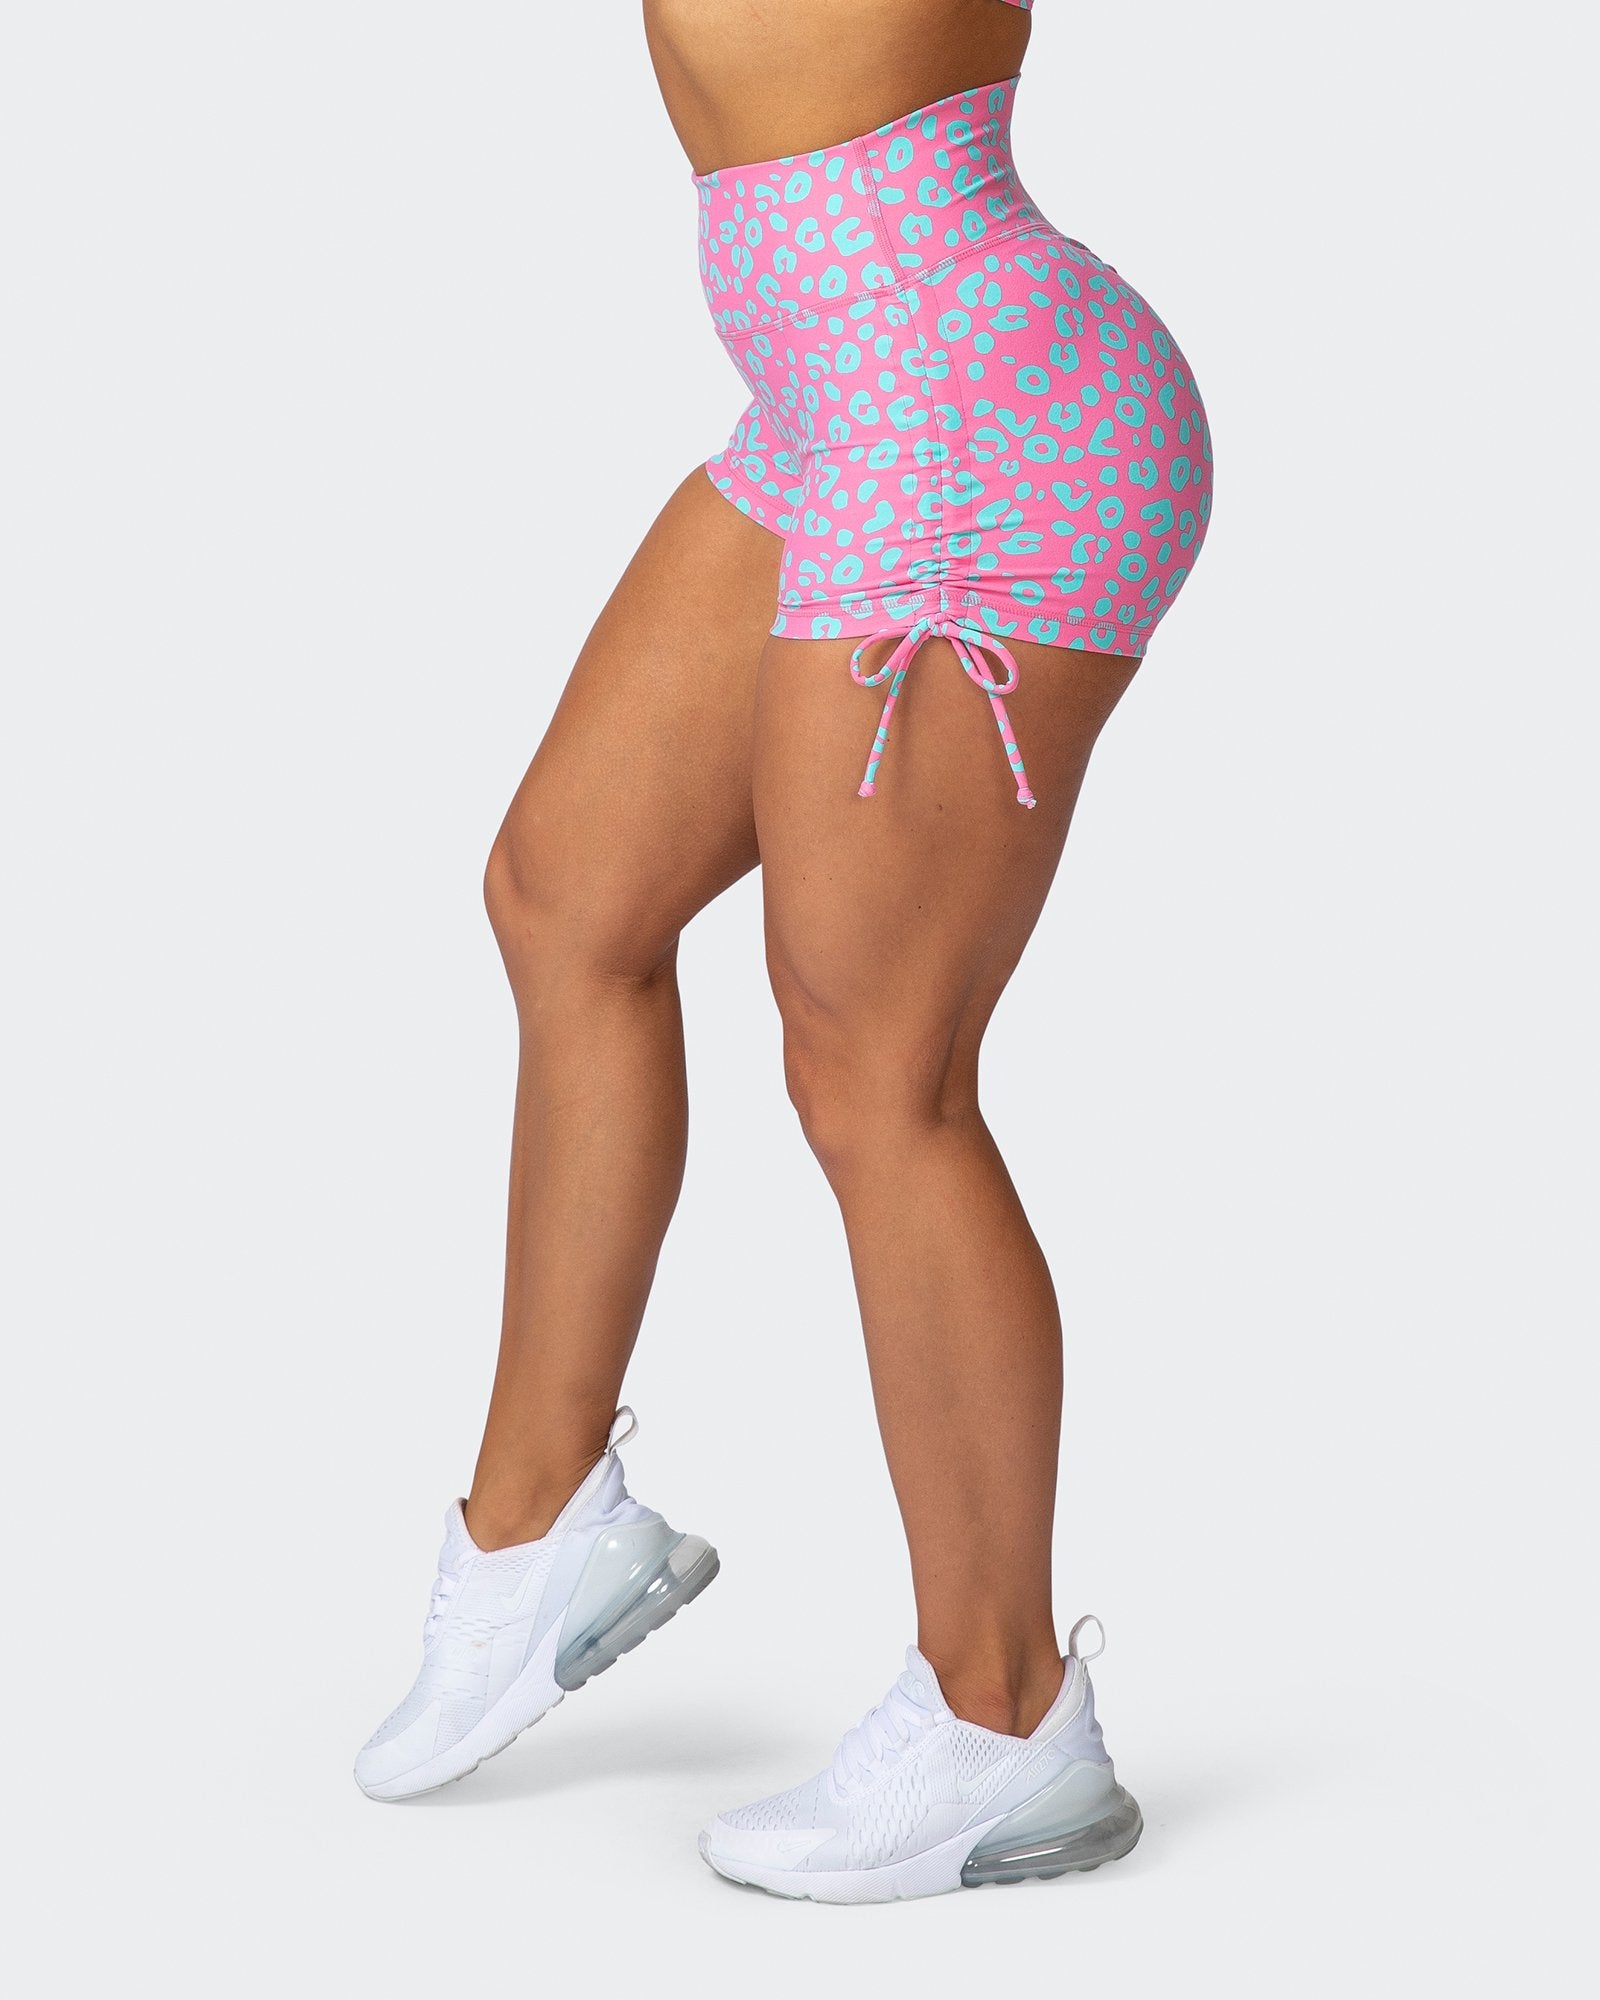 SIGNATURE SCRUNCH TIE UP BOOTY SHORTS Cotton Candy Cheetah Print